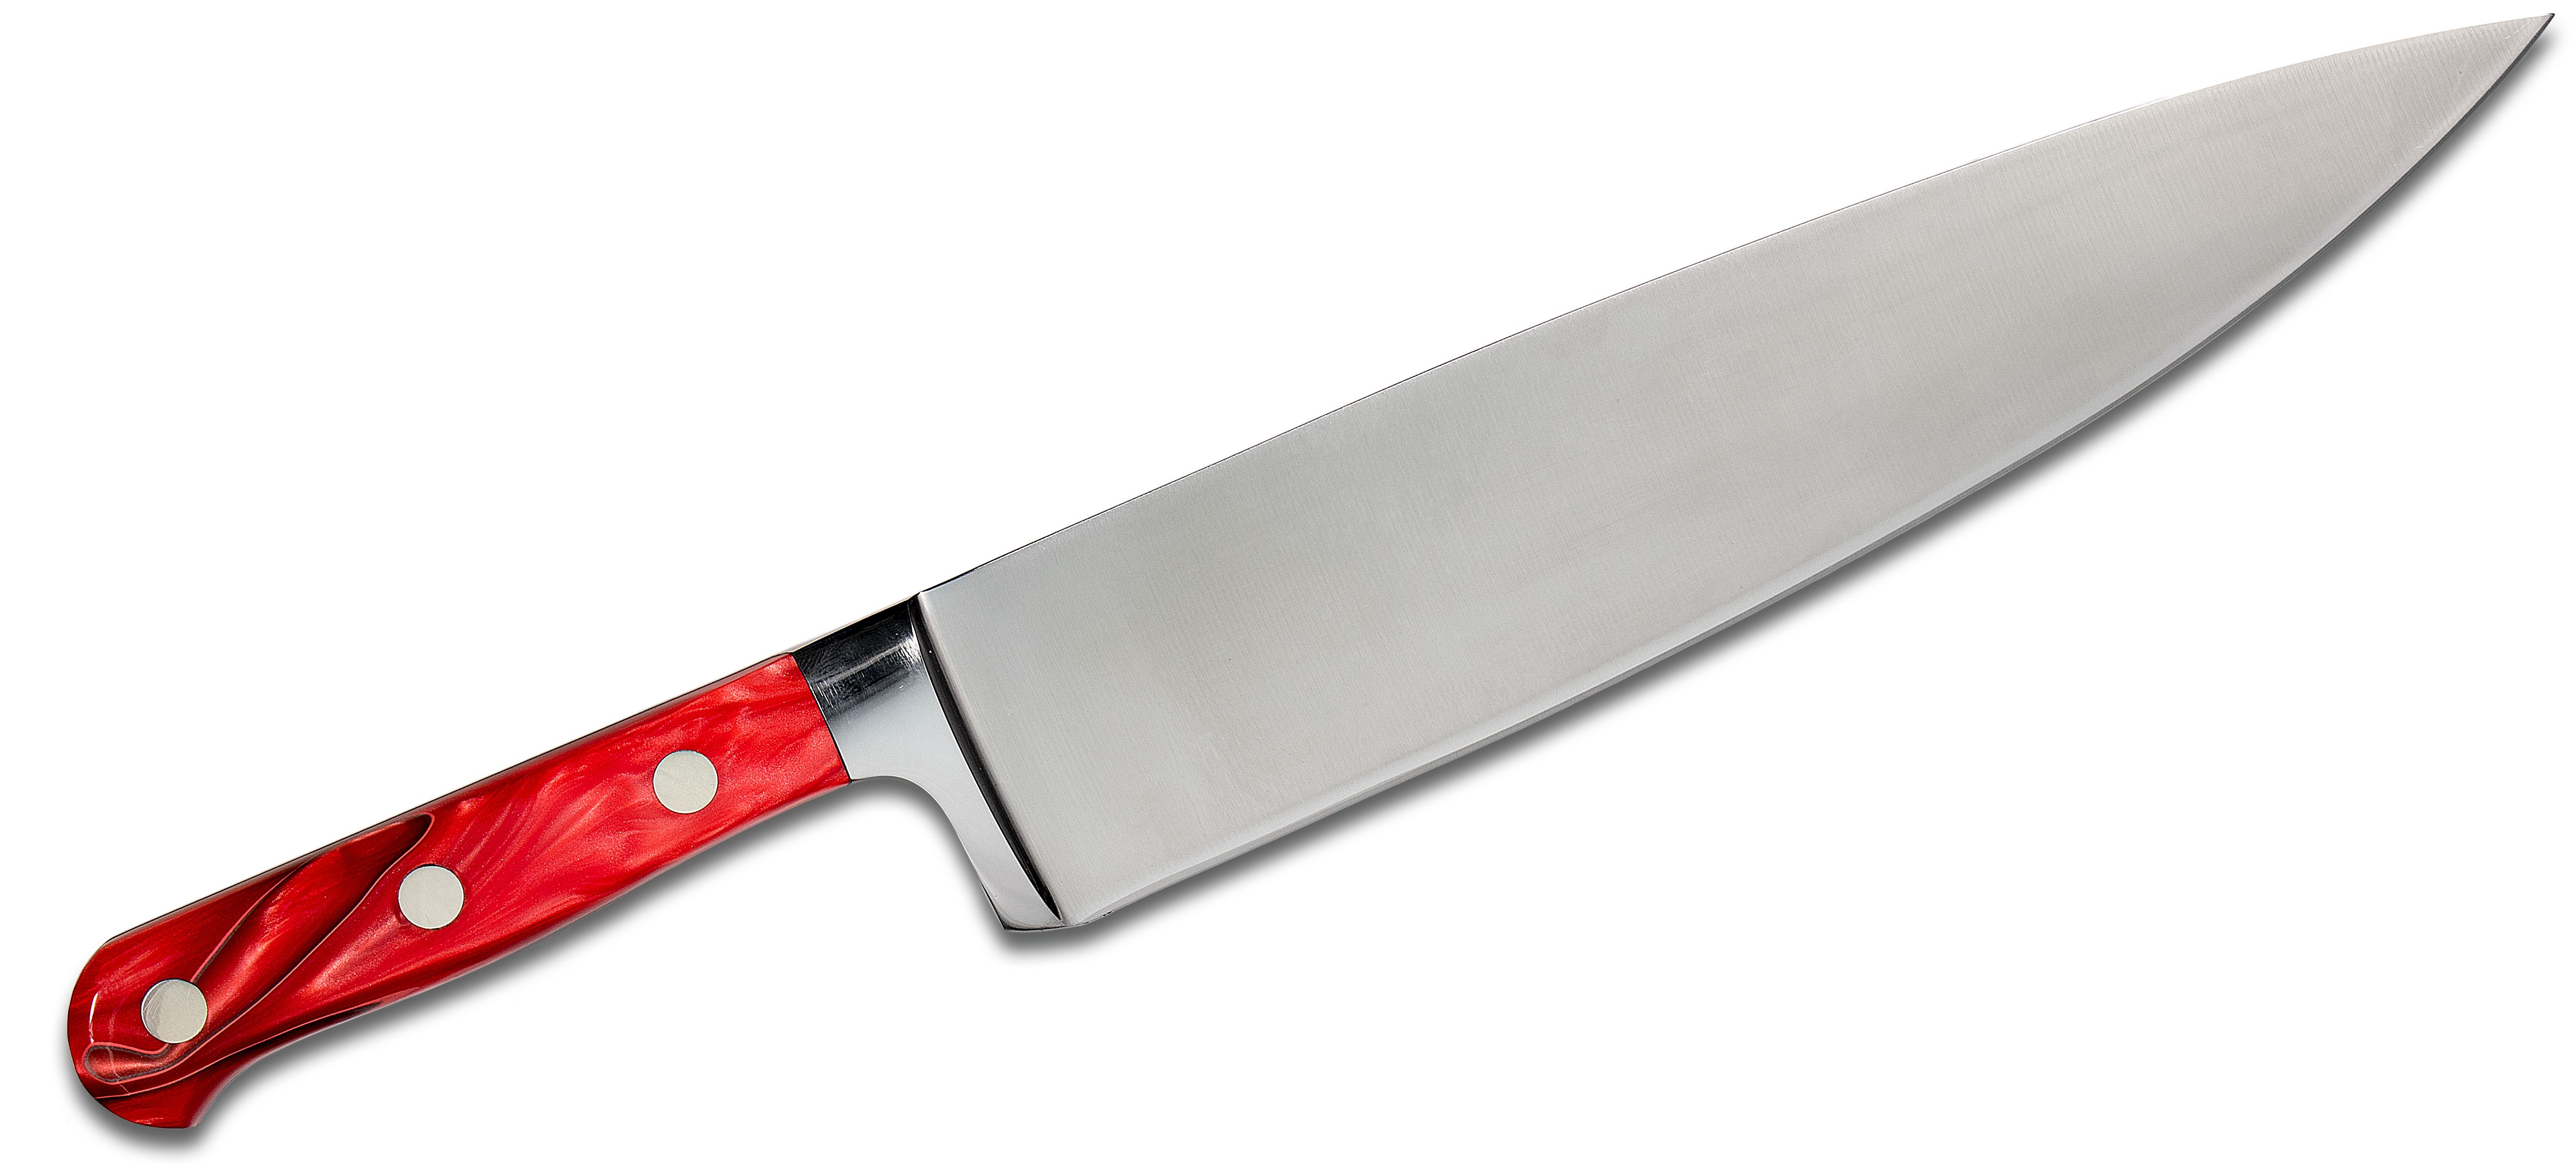 Lamson Fire Forged 10 inch Wide Chef's Knife 59952